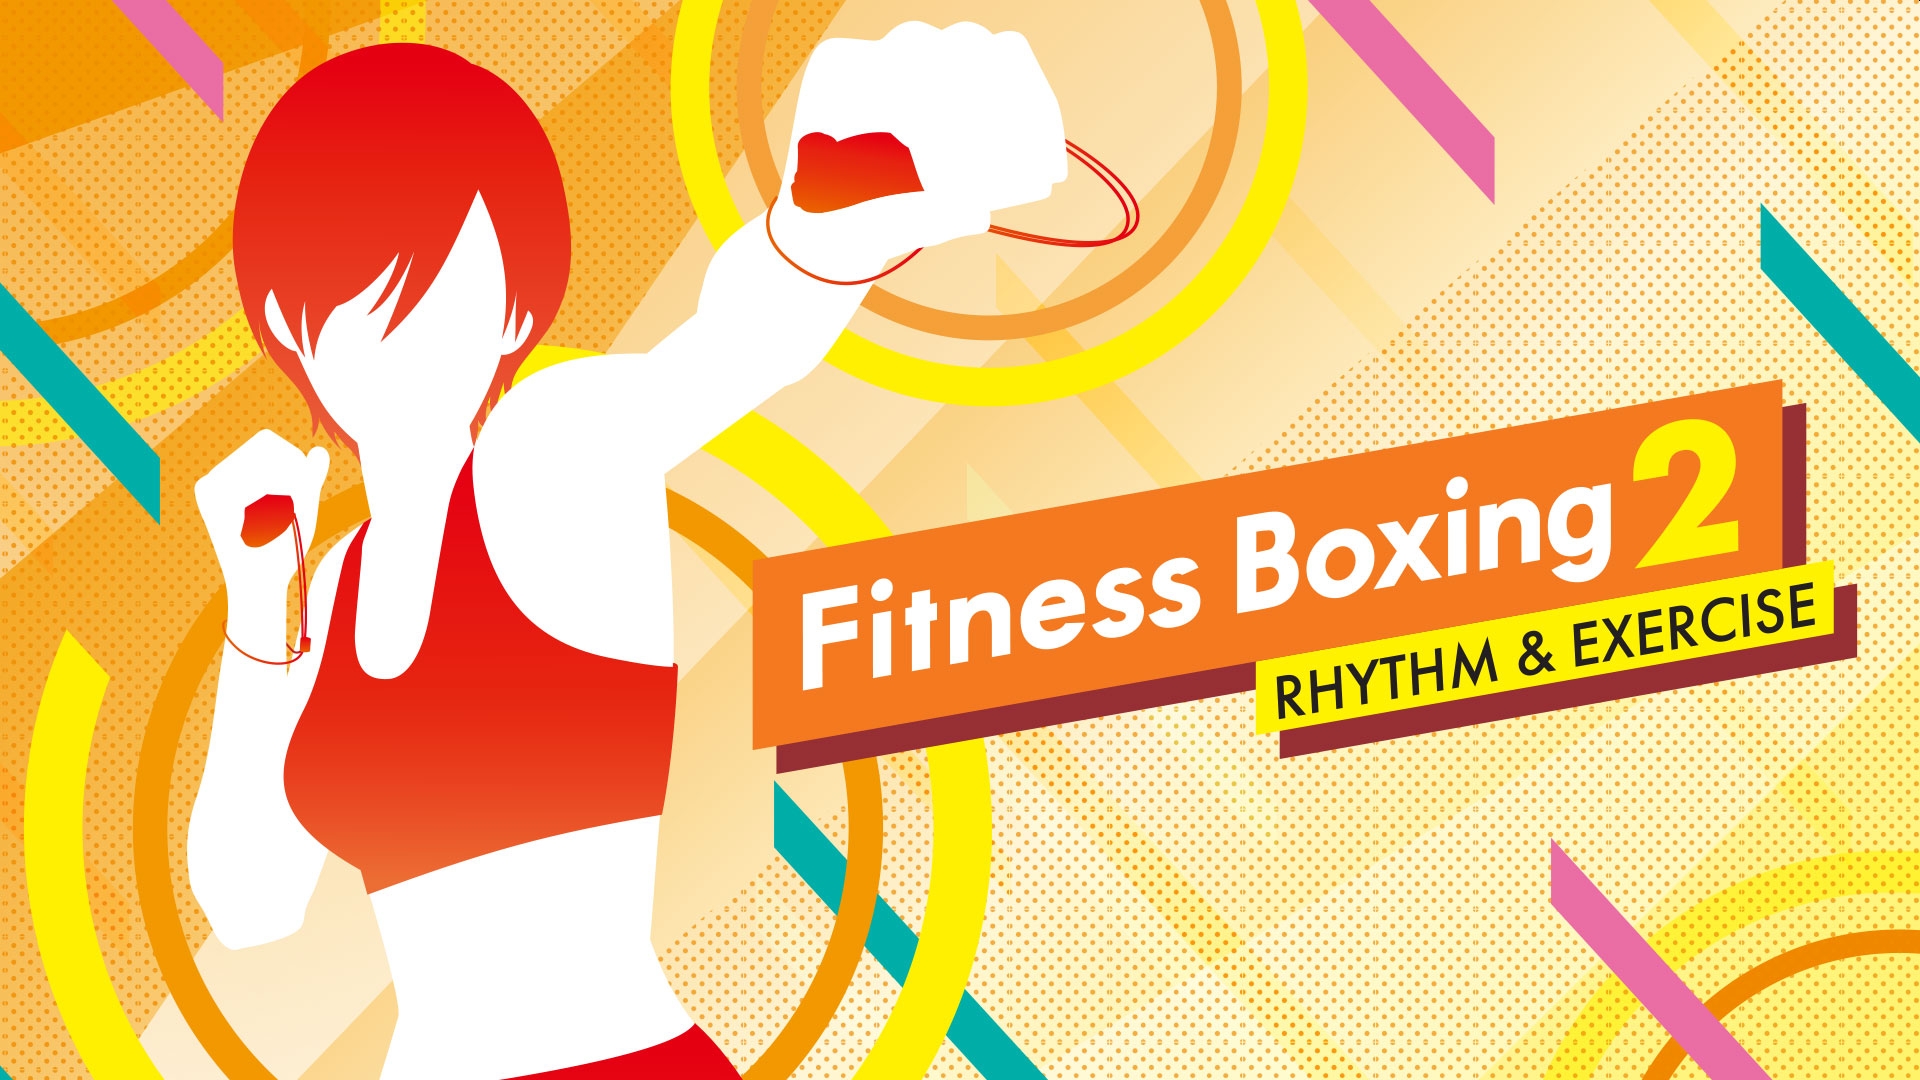 Fitness Boxing 2: Rhythm And Exercise Demo Now Available On Nintendo Switch